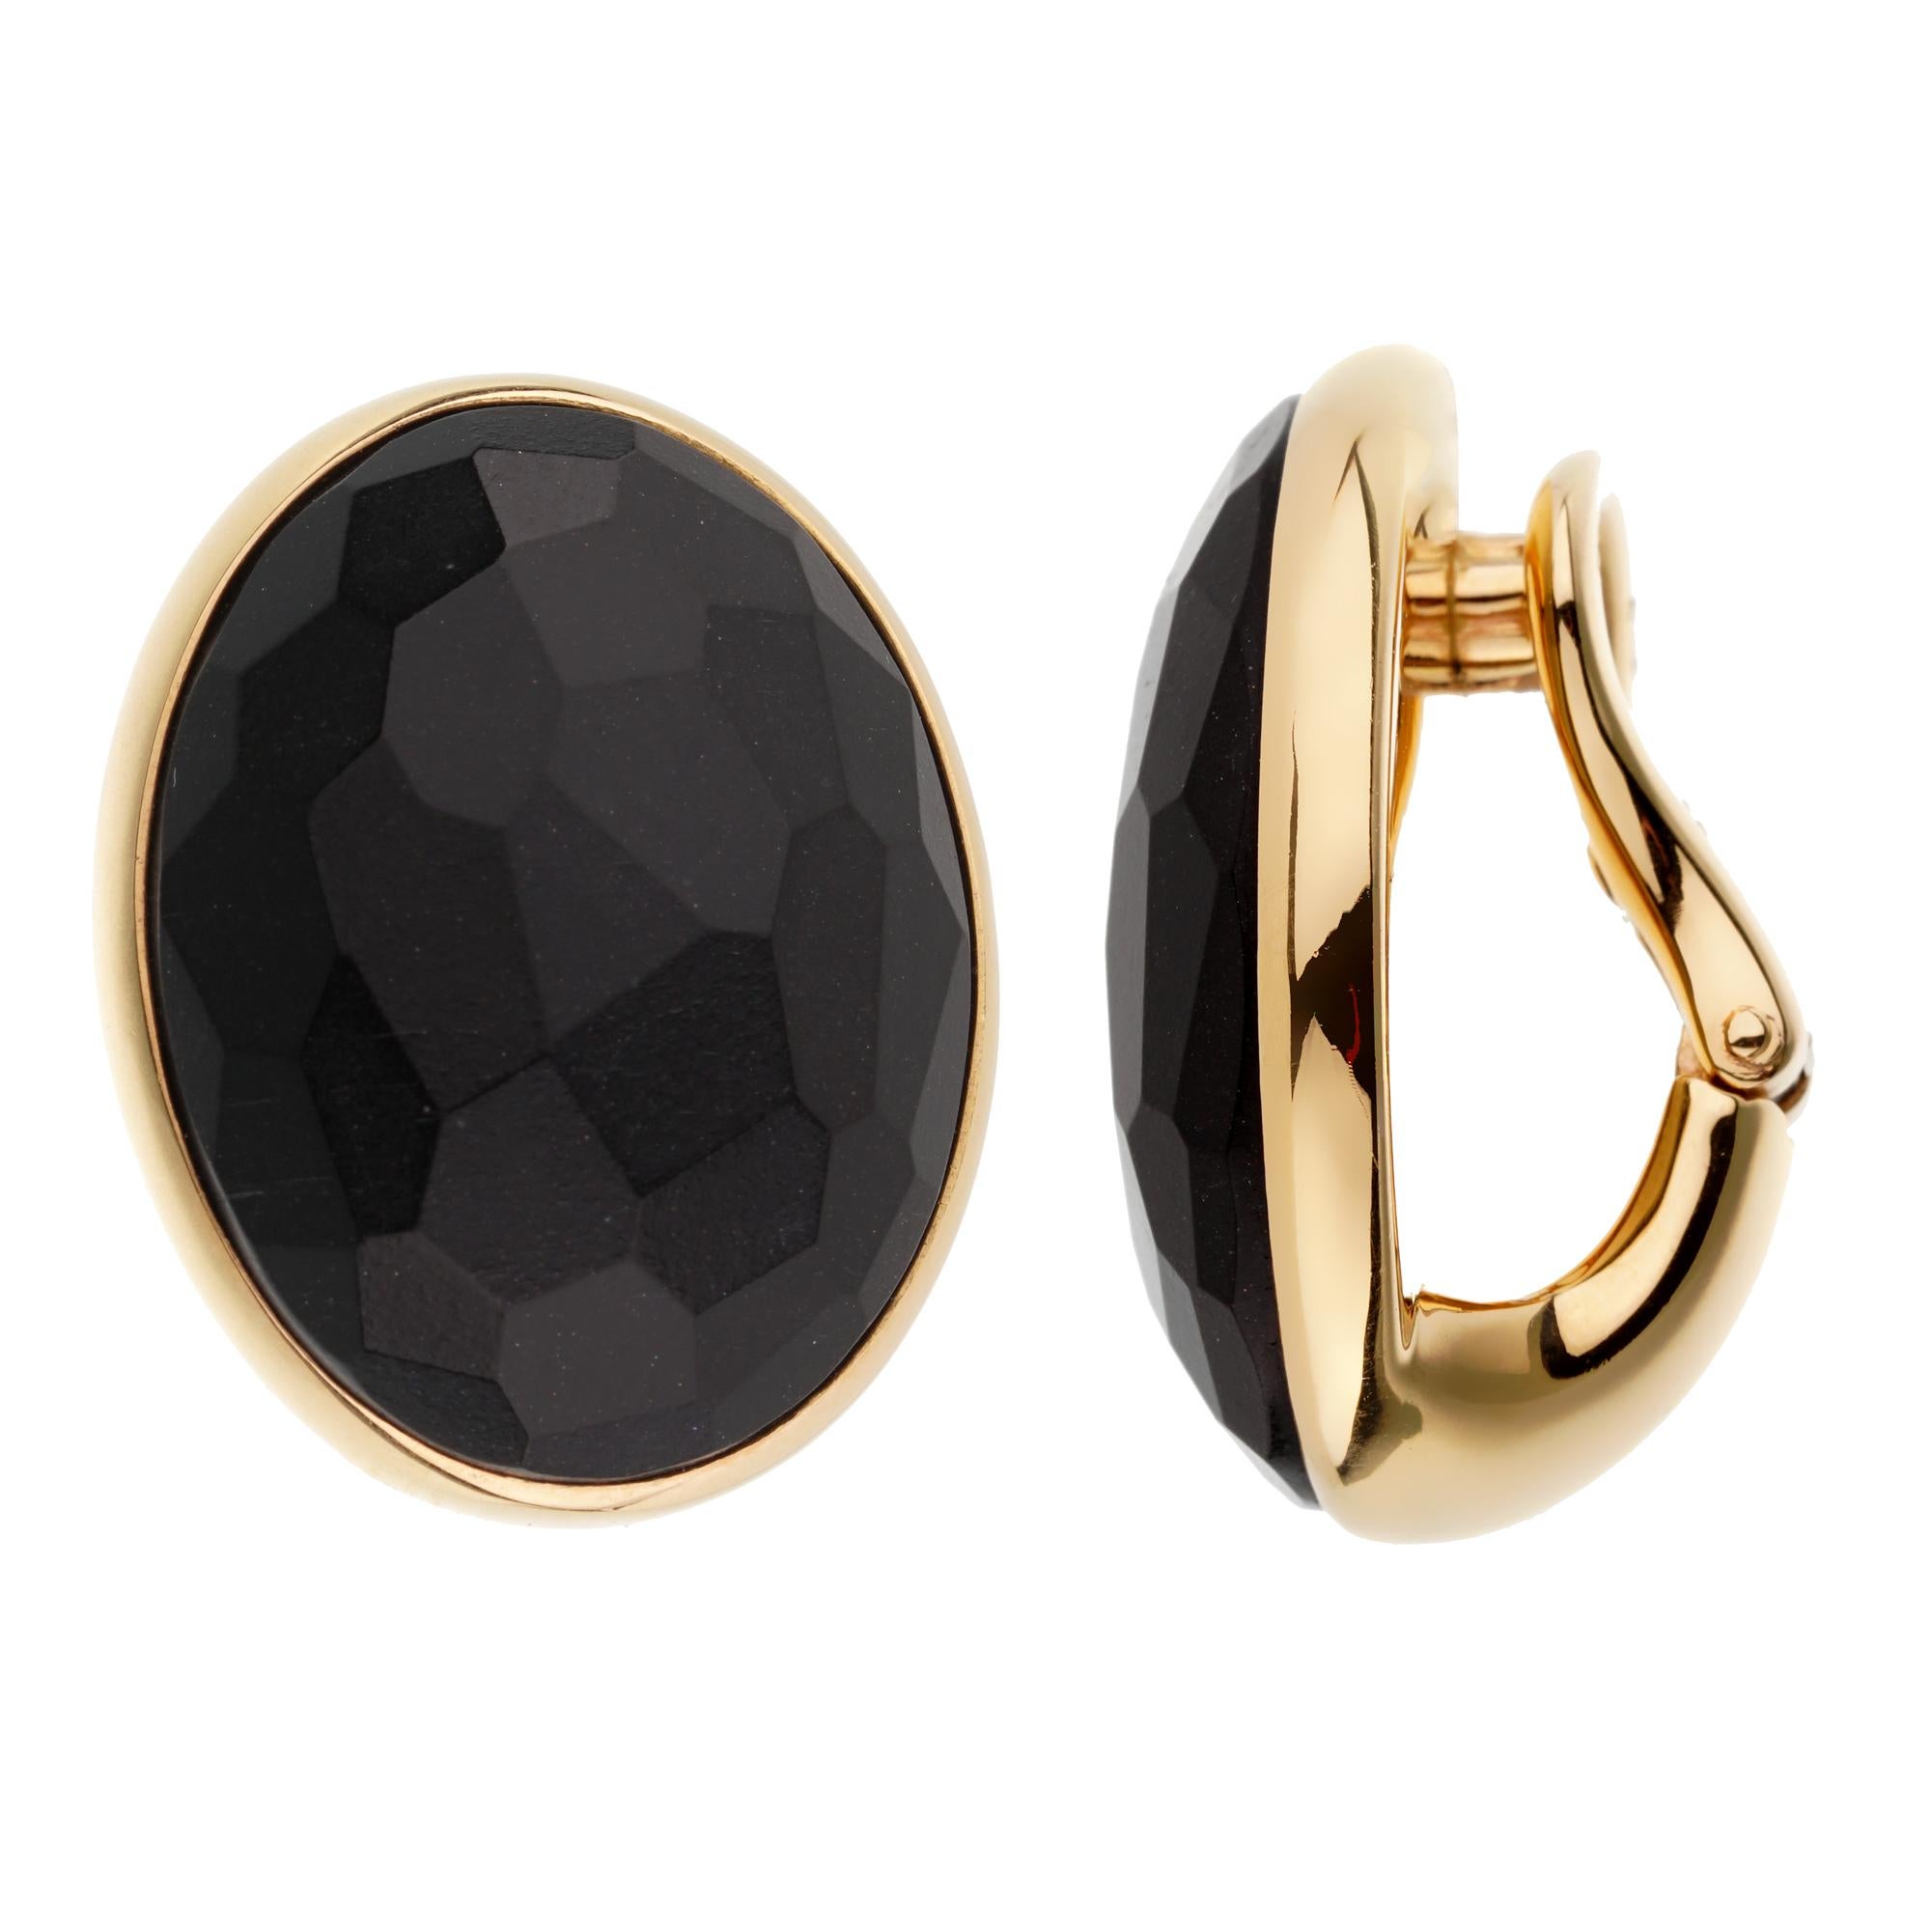 A fabulous pair of authentic Pomellato earrings set with faceted .Black Jet totaling 17.90ct in 18k rose gold. The earrings measure .80